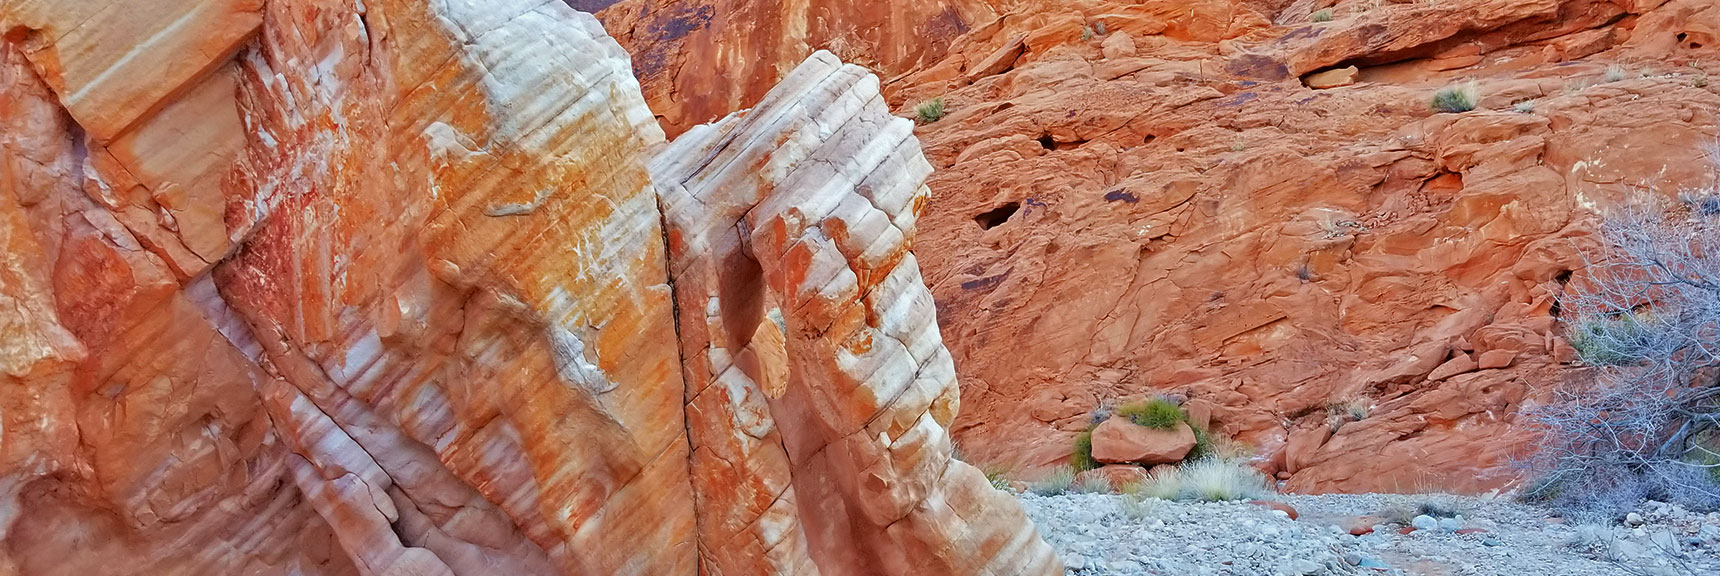 Colorful Firewave Rock Formations in the Northern Canyon Wash on Prospect Trail in Valley of Fire State Park, Nevada